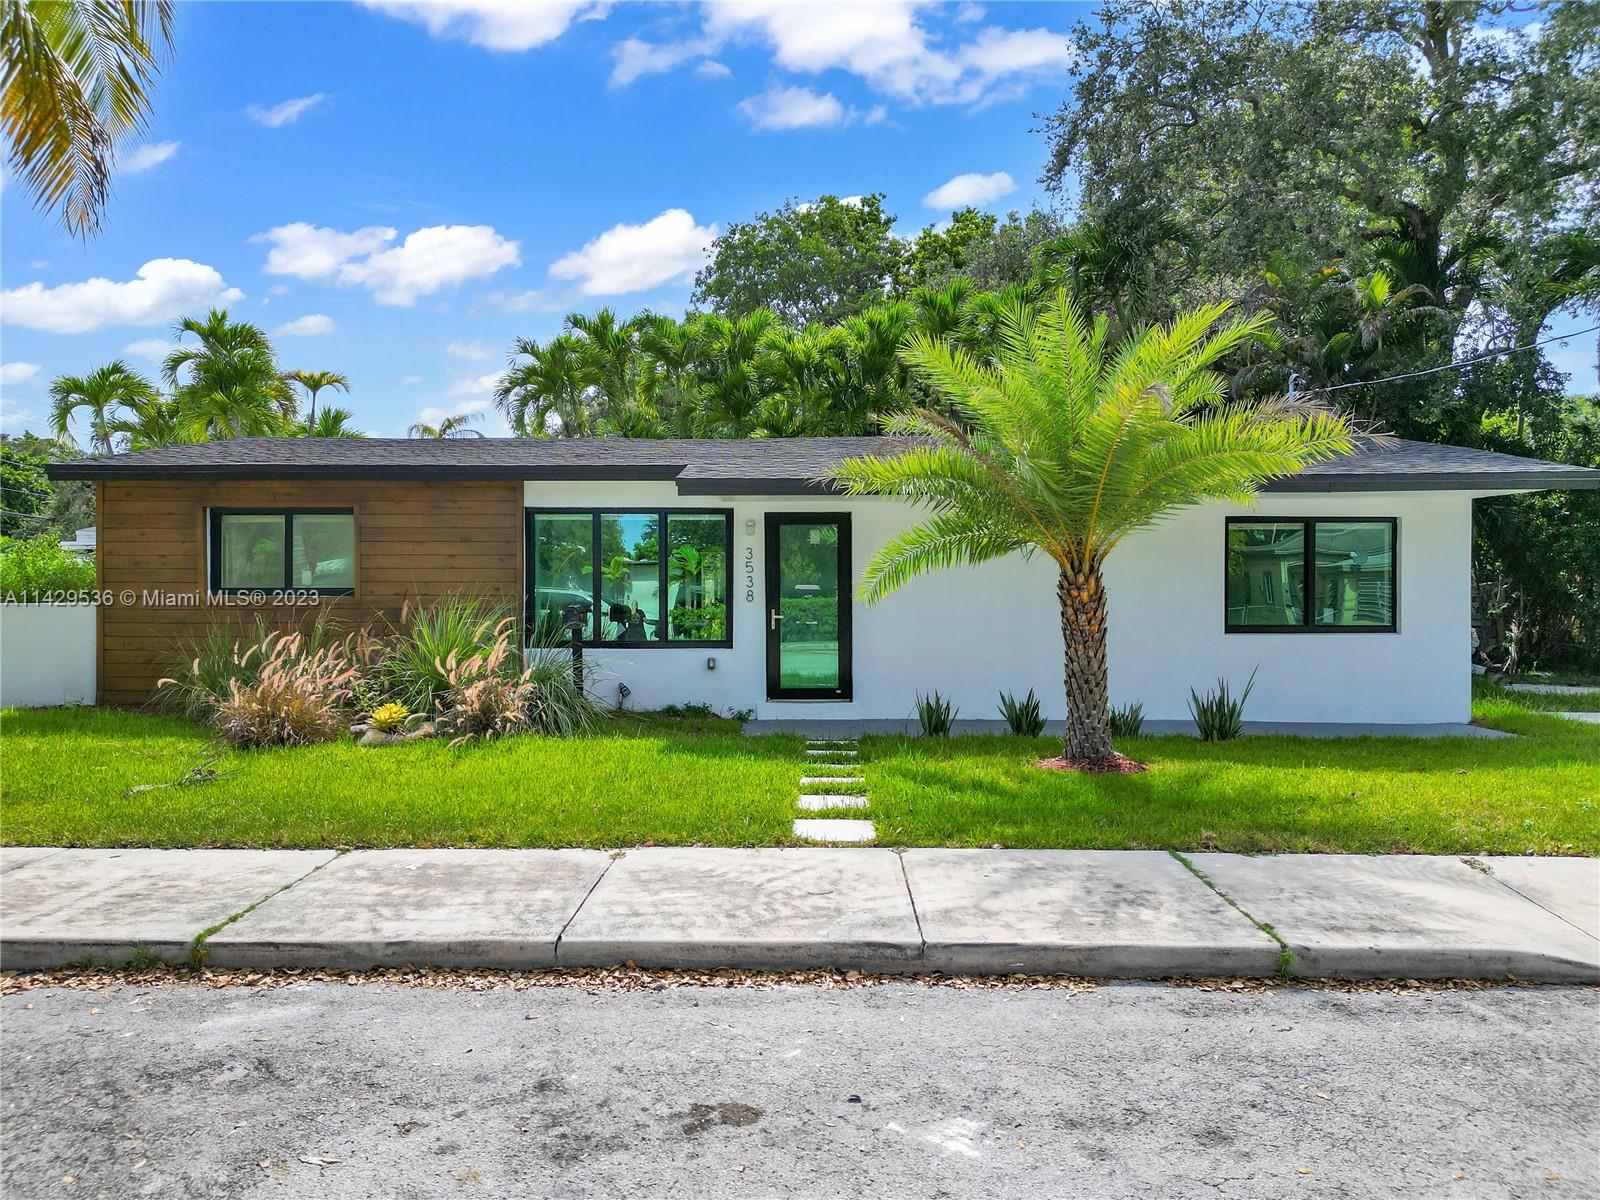 Photo 1 of 3538 Hibiscus St in Miami - MLS A11429536